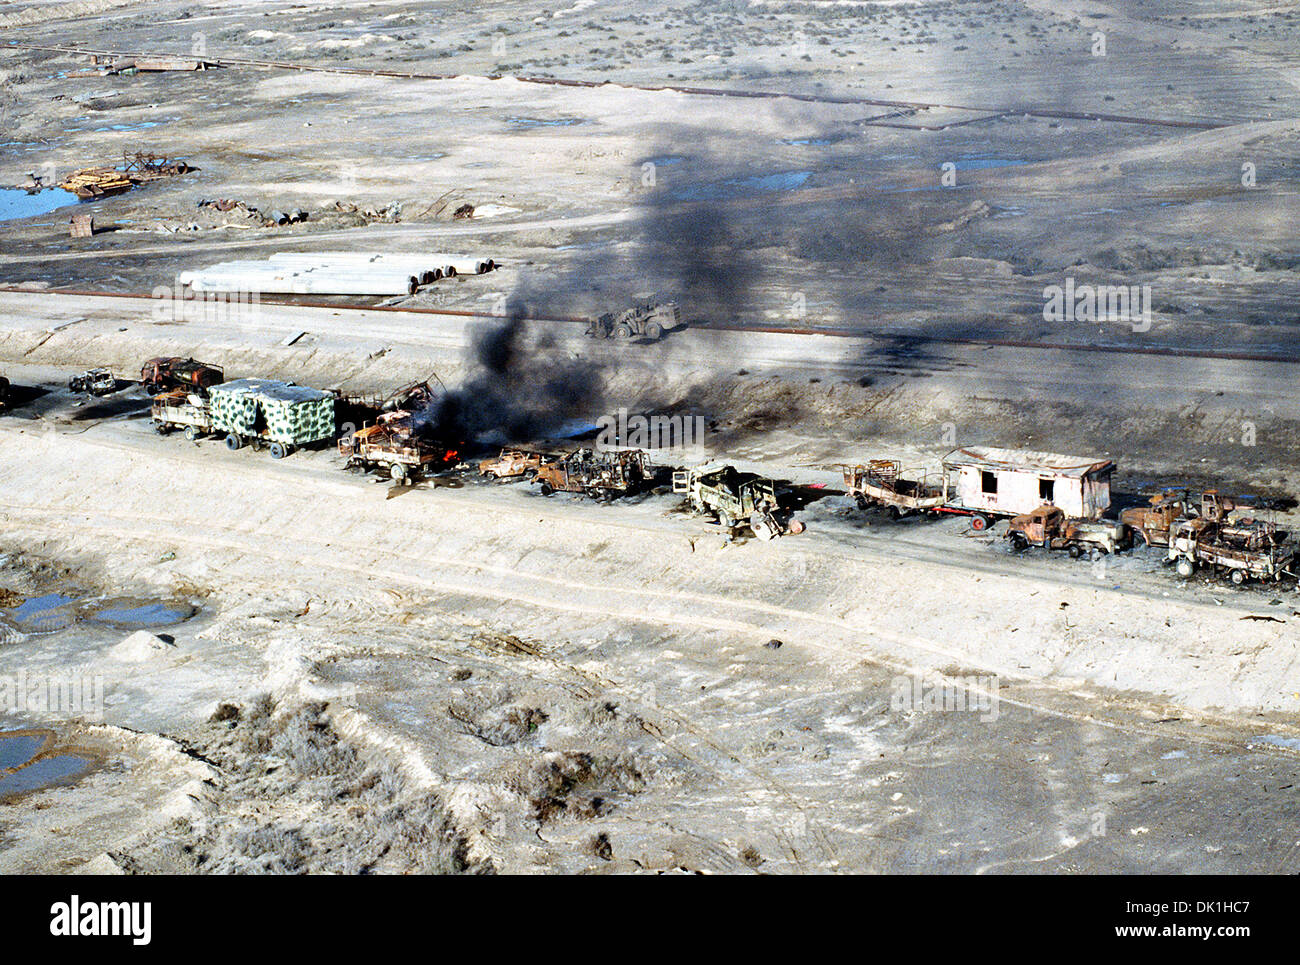 Aerial view of demolished Iraqi military vehicles destroyed by coalition forces along a roadway in the Euphrates River Valley in the aftermath of Operation Desert Storm March 4, 1991 in Iraq. Stock Photo